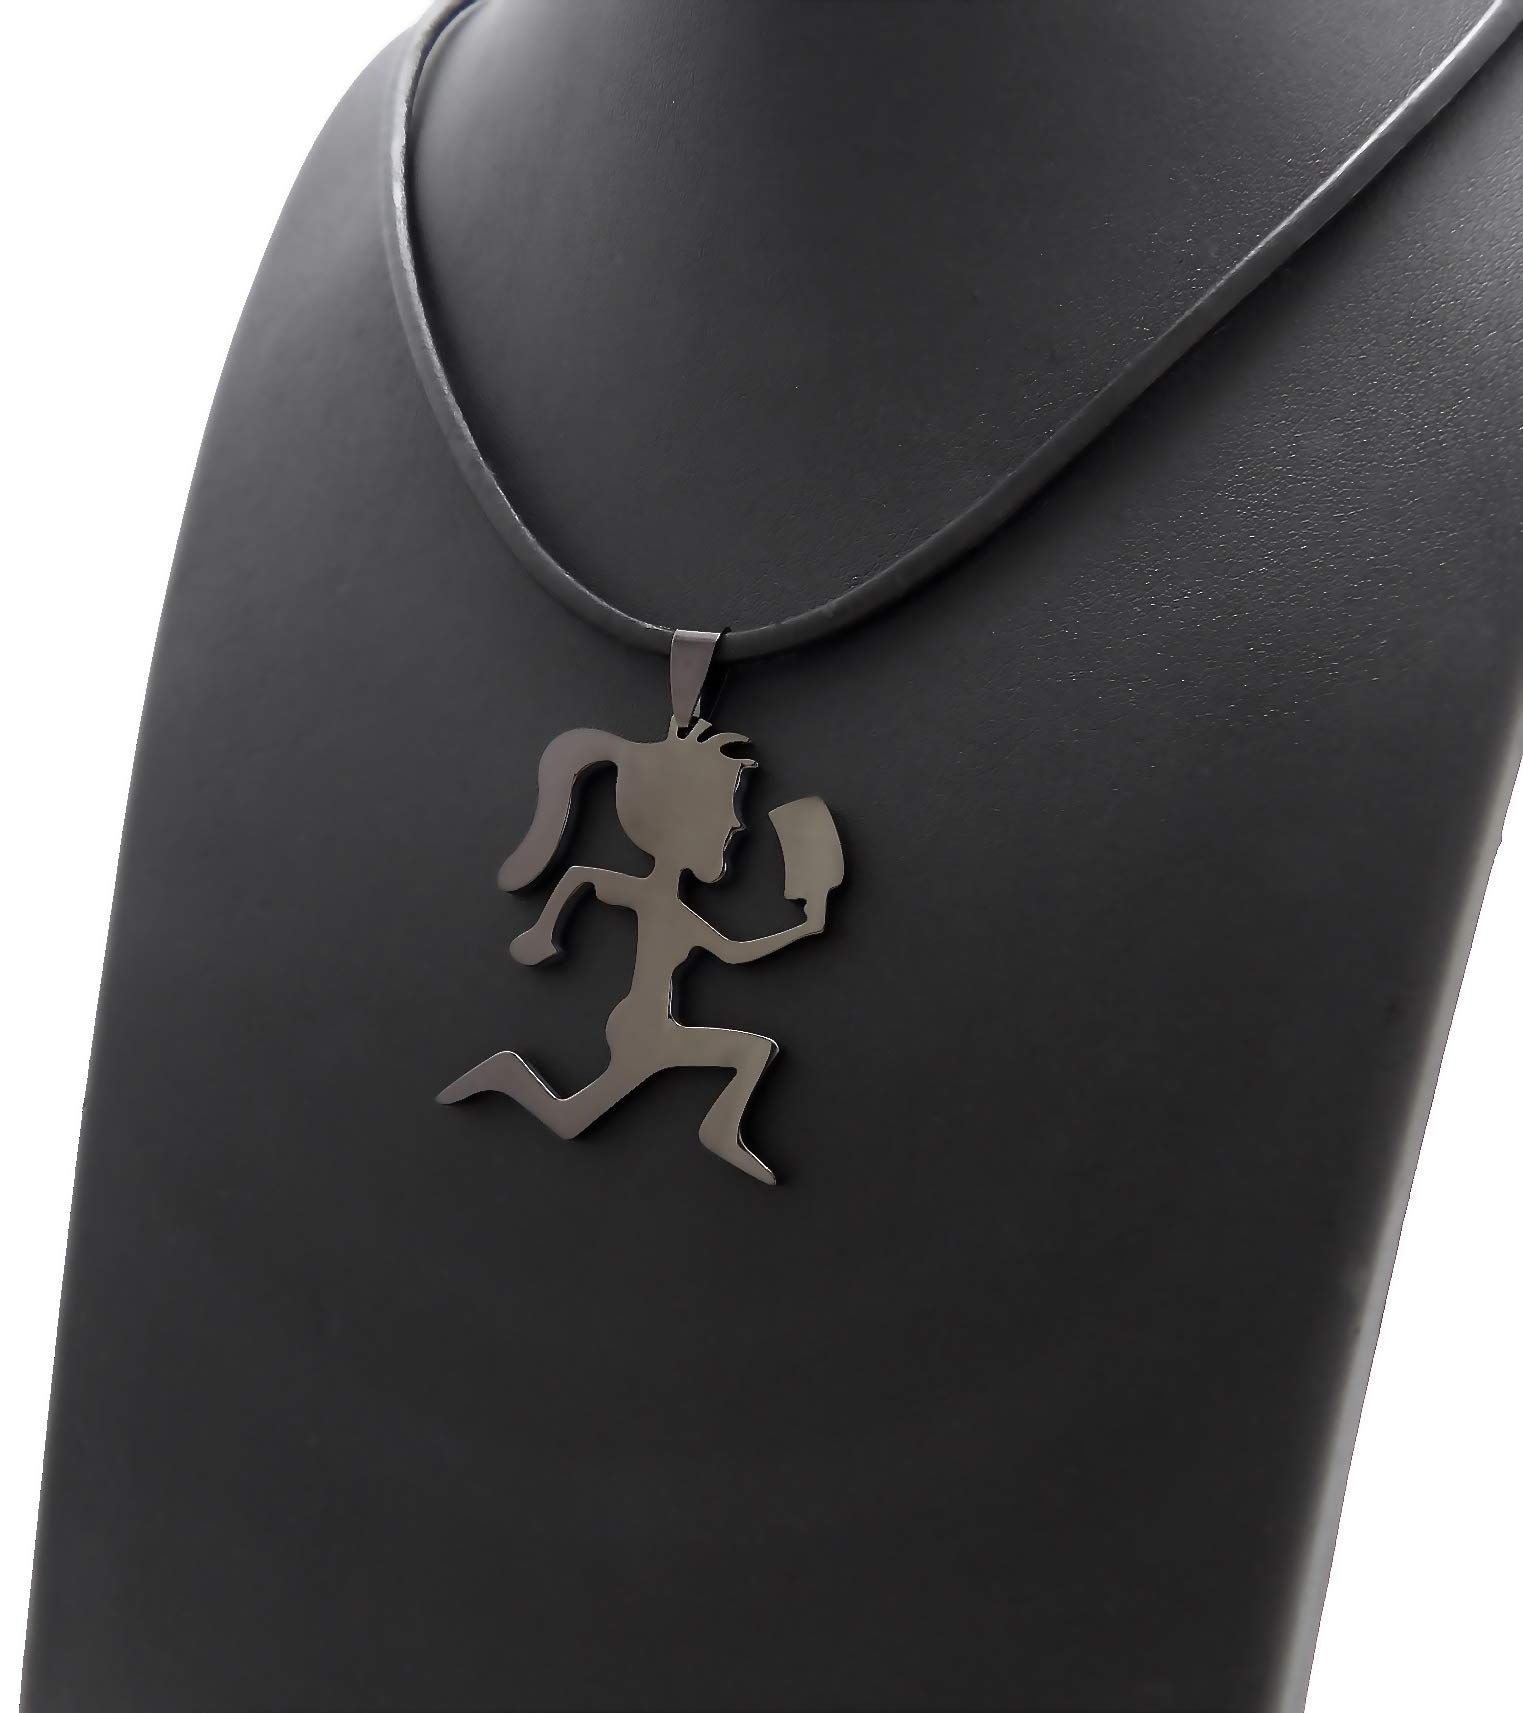 GWOOD Juggalette Pendant with 18 Inch Cord Necklace Gun Metal Color